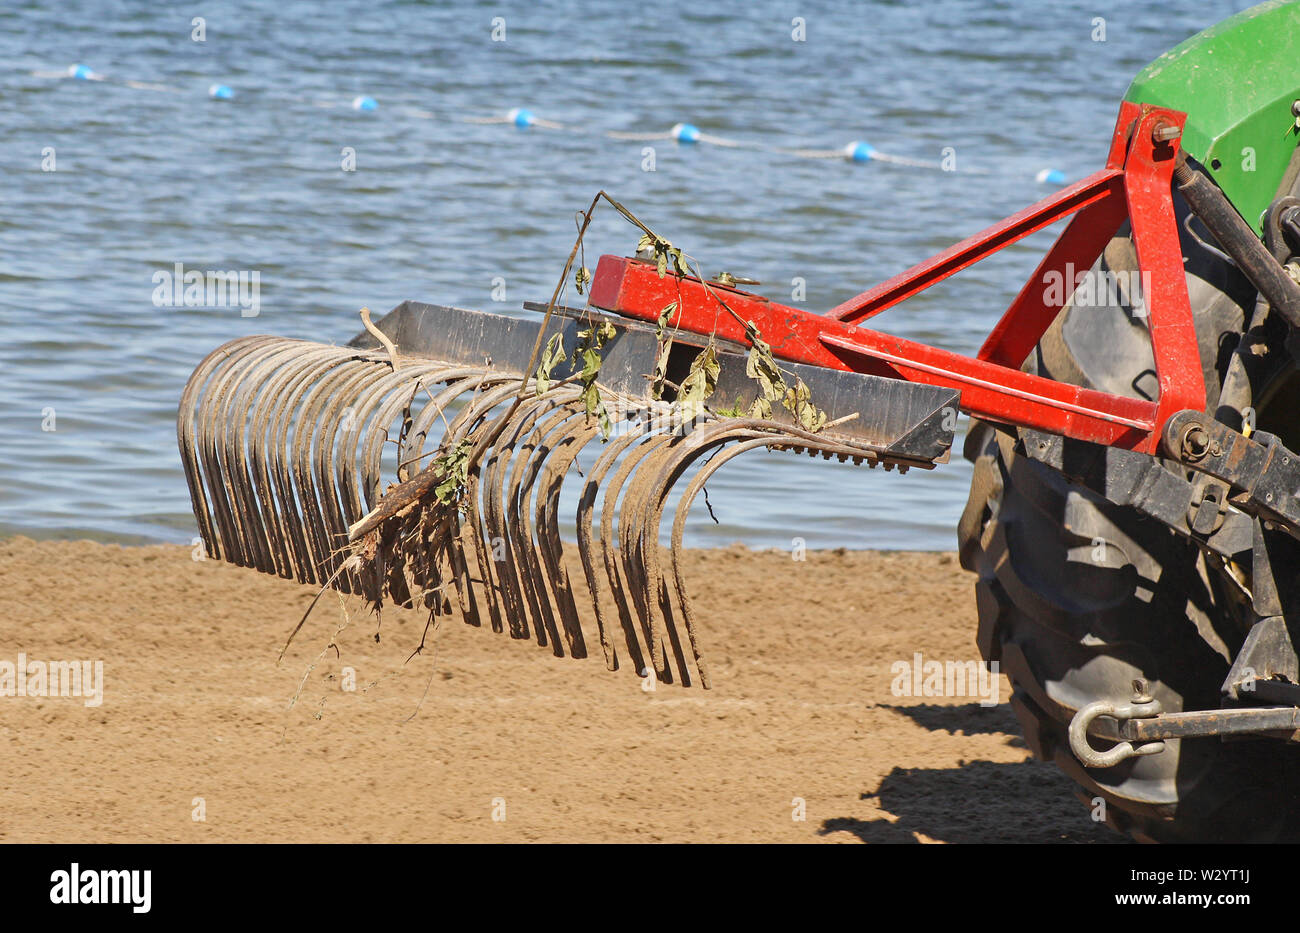 Tractor with large metal rake attached sifting, raking and clearing debris at a public beach in early morning Stock Photo